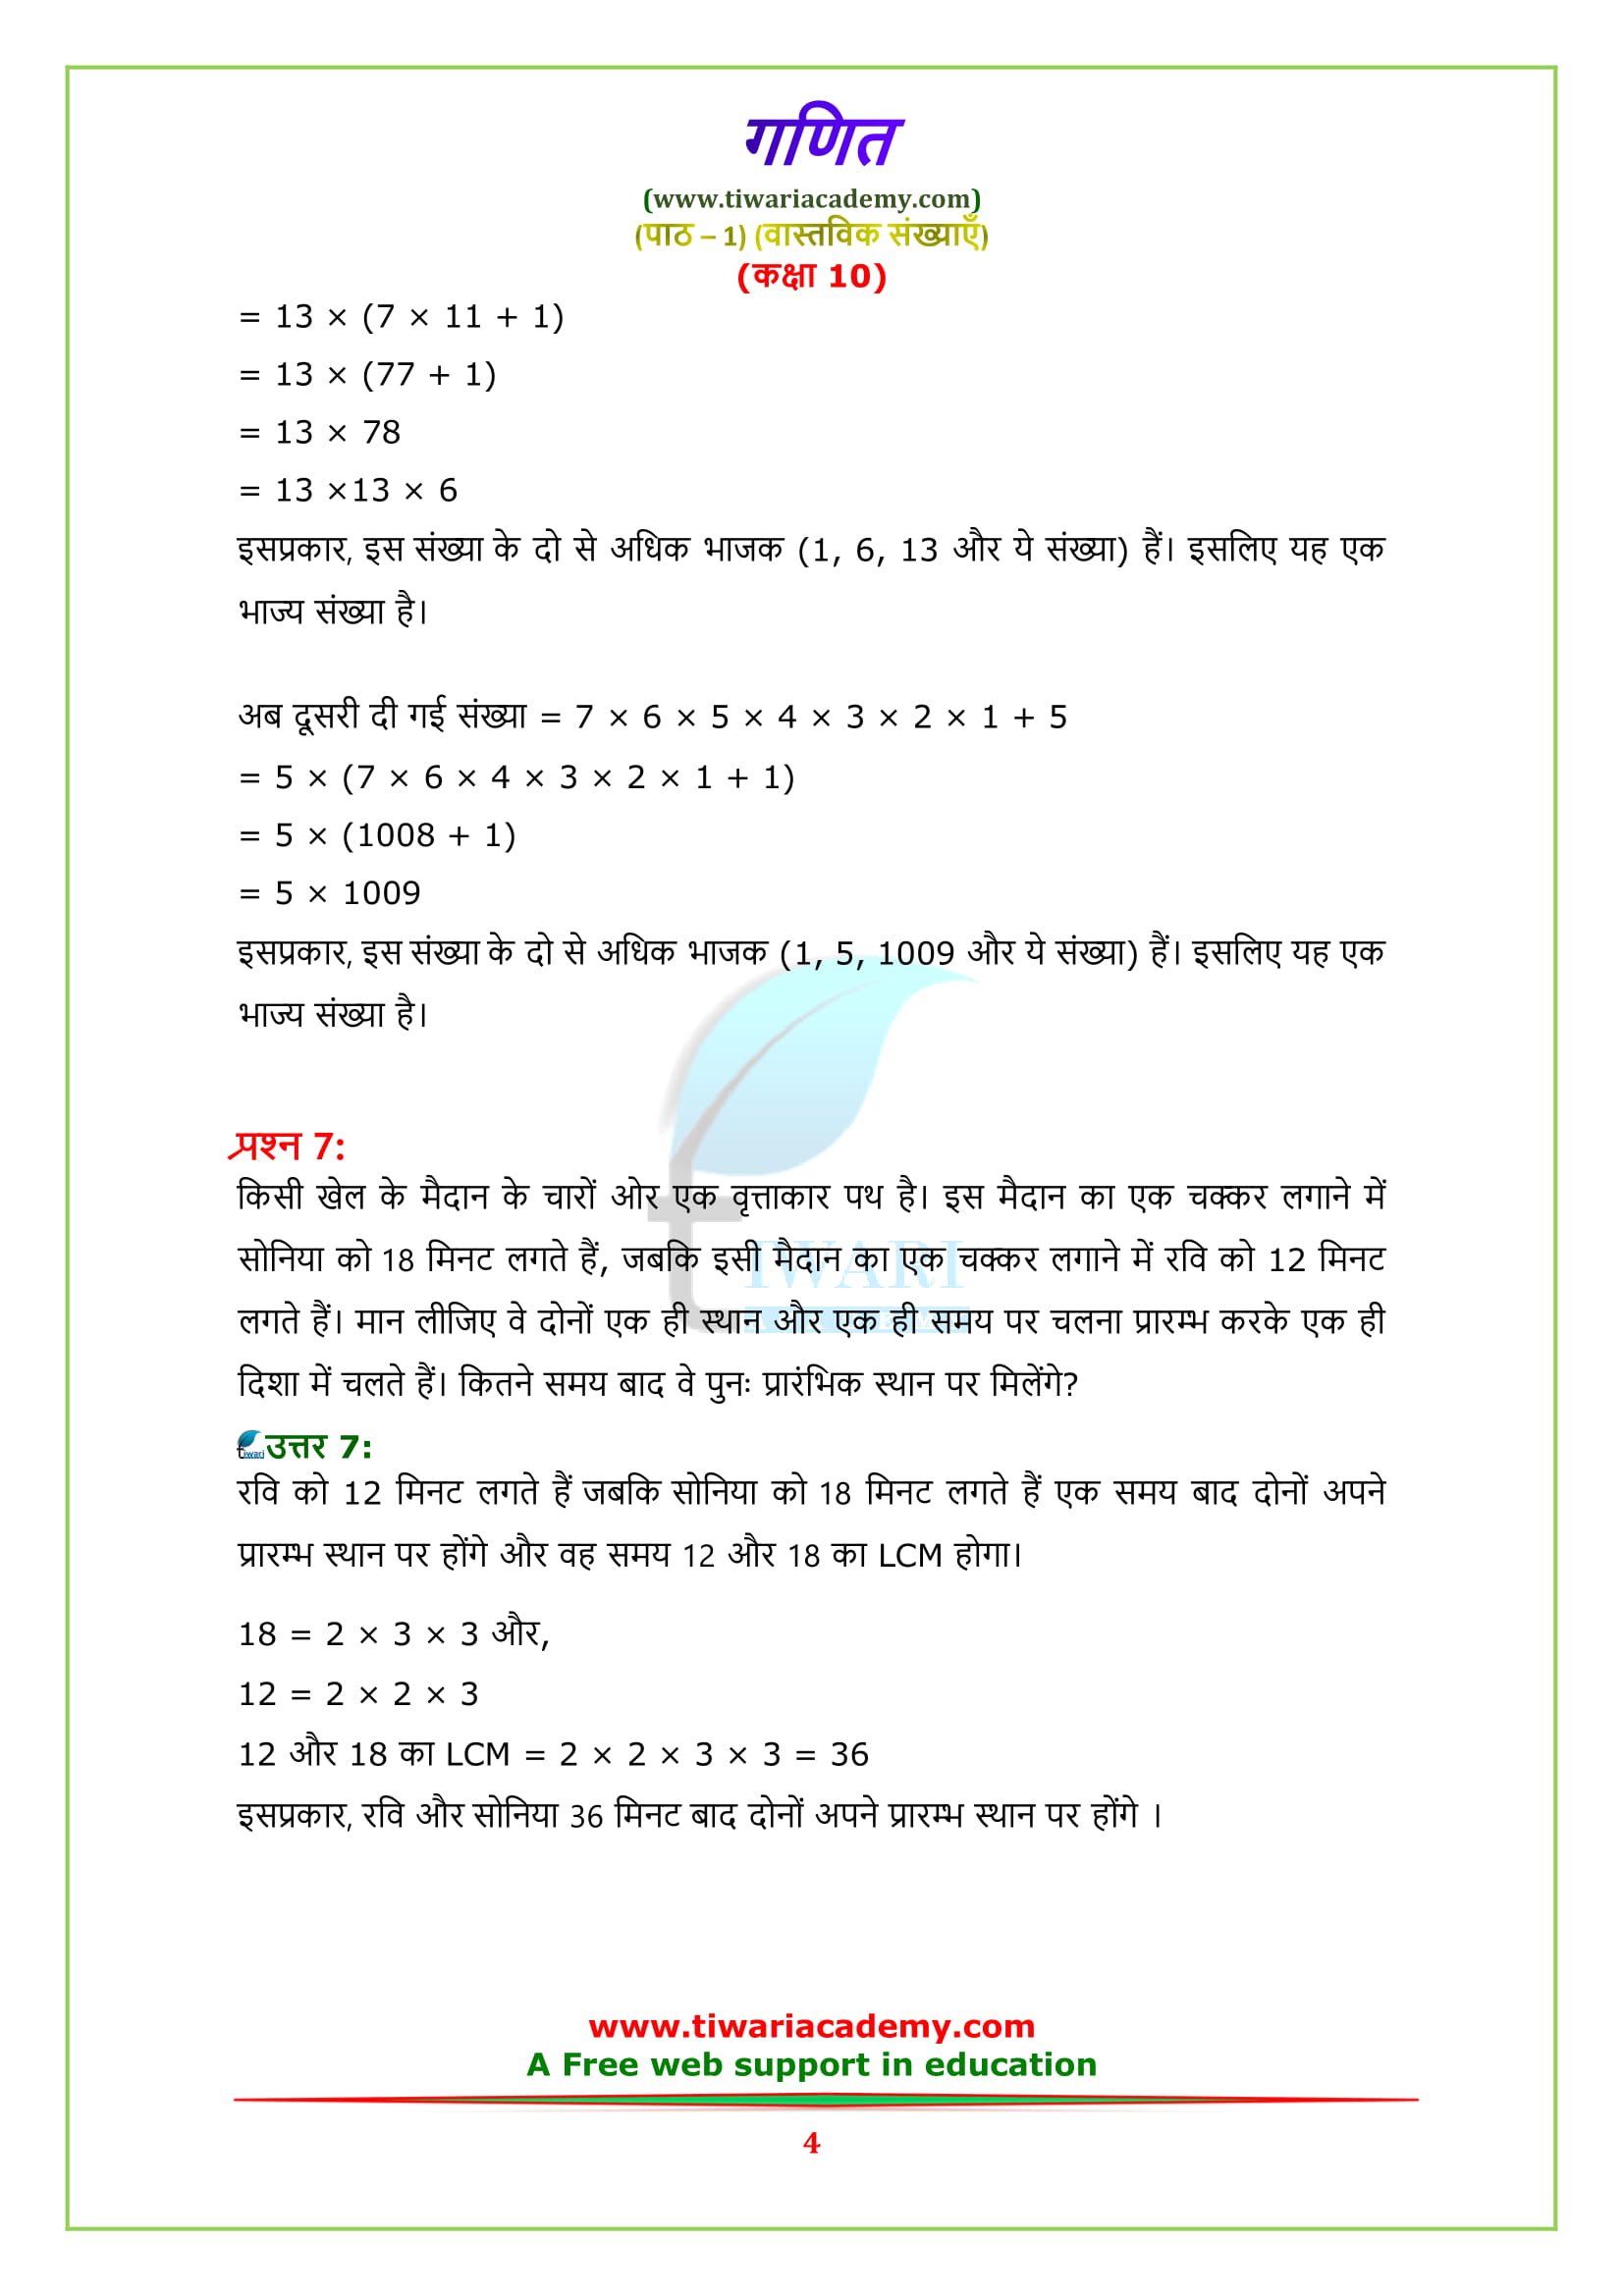 Class 10 maths solutions chapter 1 exercise 1.2 PDF in hindi medium